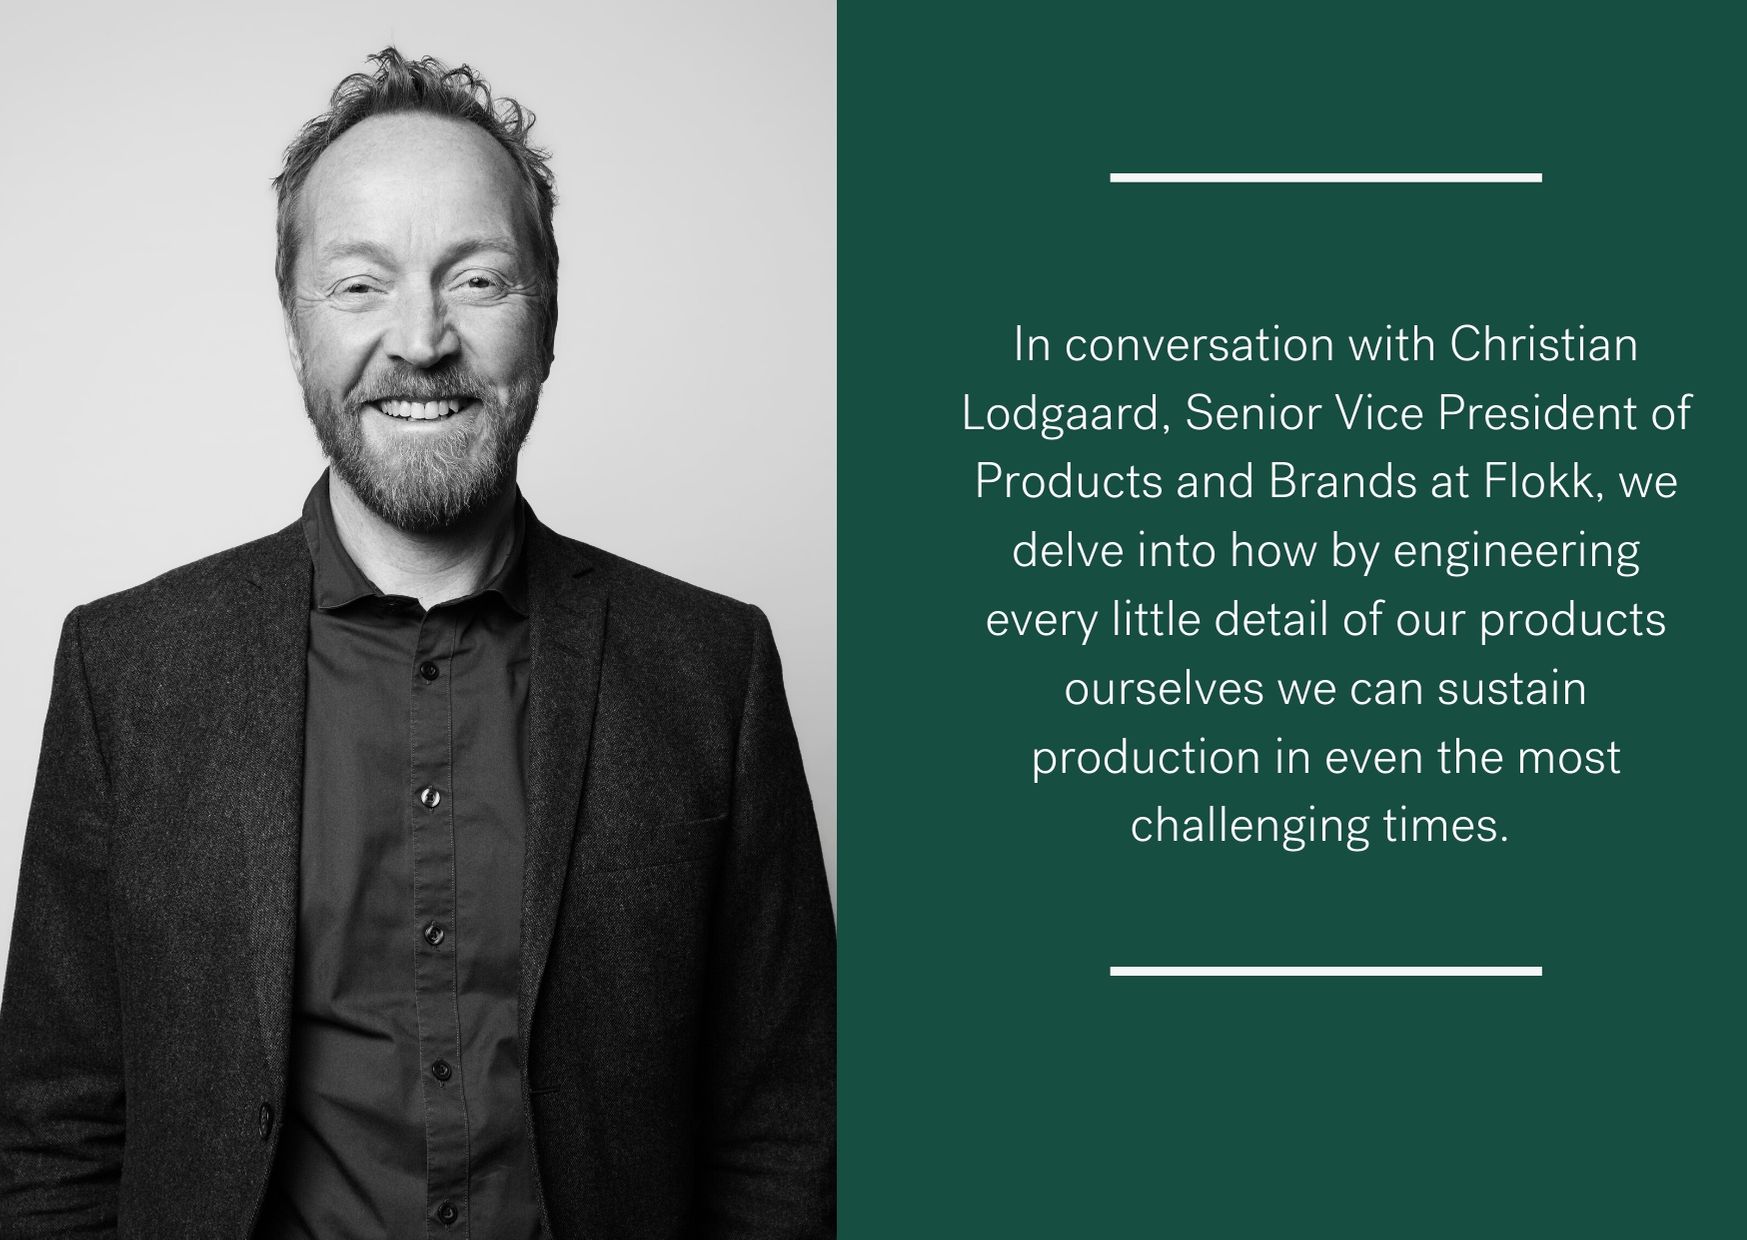 In conversation with Christian Lodgaard, Senior Vice President of Products and Brands at Flokk, we delve into how by engineering every little detail of our products ourselves we can sustain production in even the mos